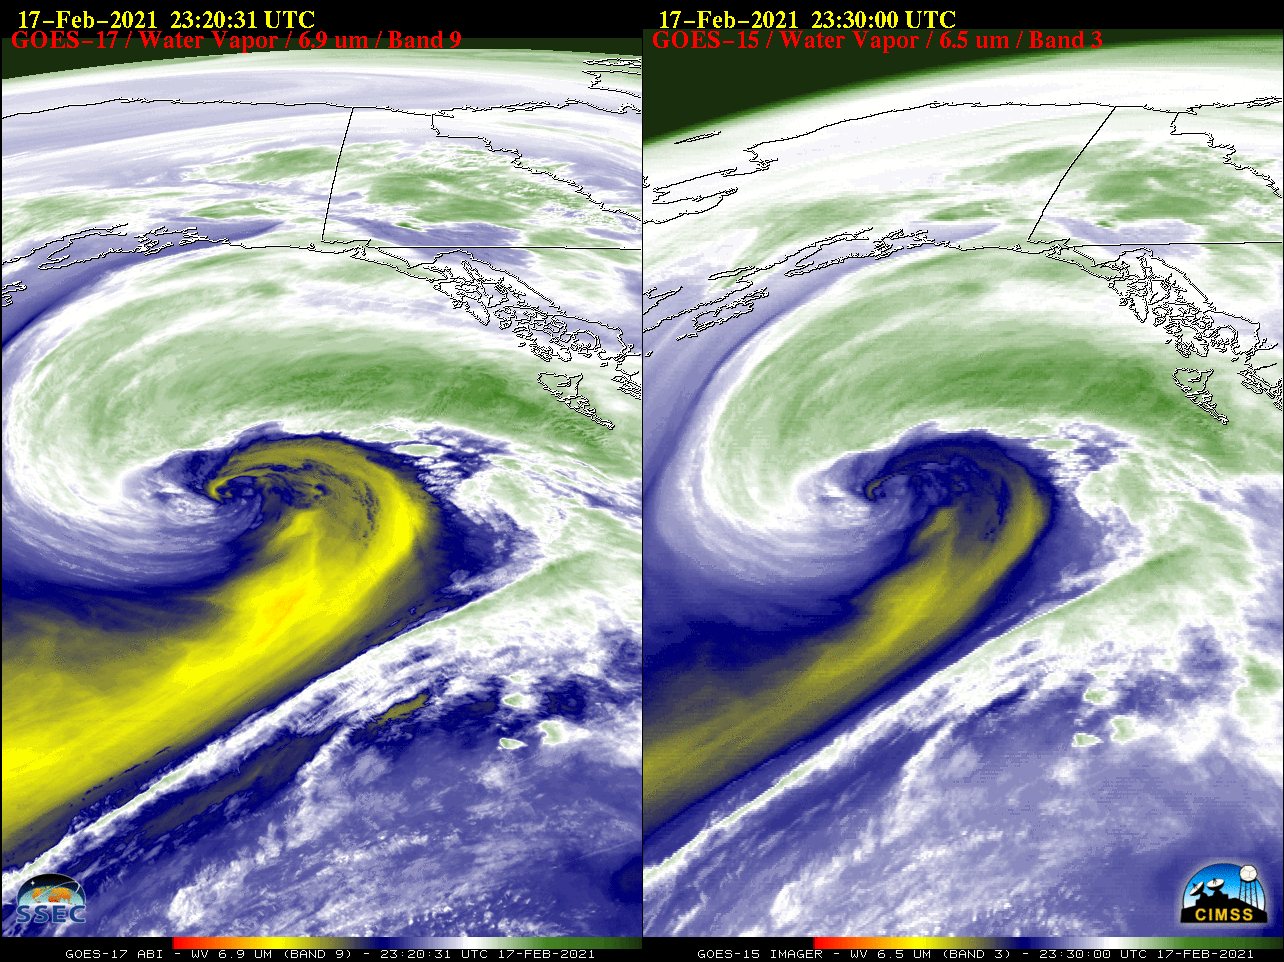 Water Vapor images from GOES-17 (6.9 µm, left) and GOES-15 (6.5 µm, right) [click to play animation | MP4]